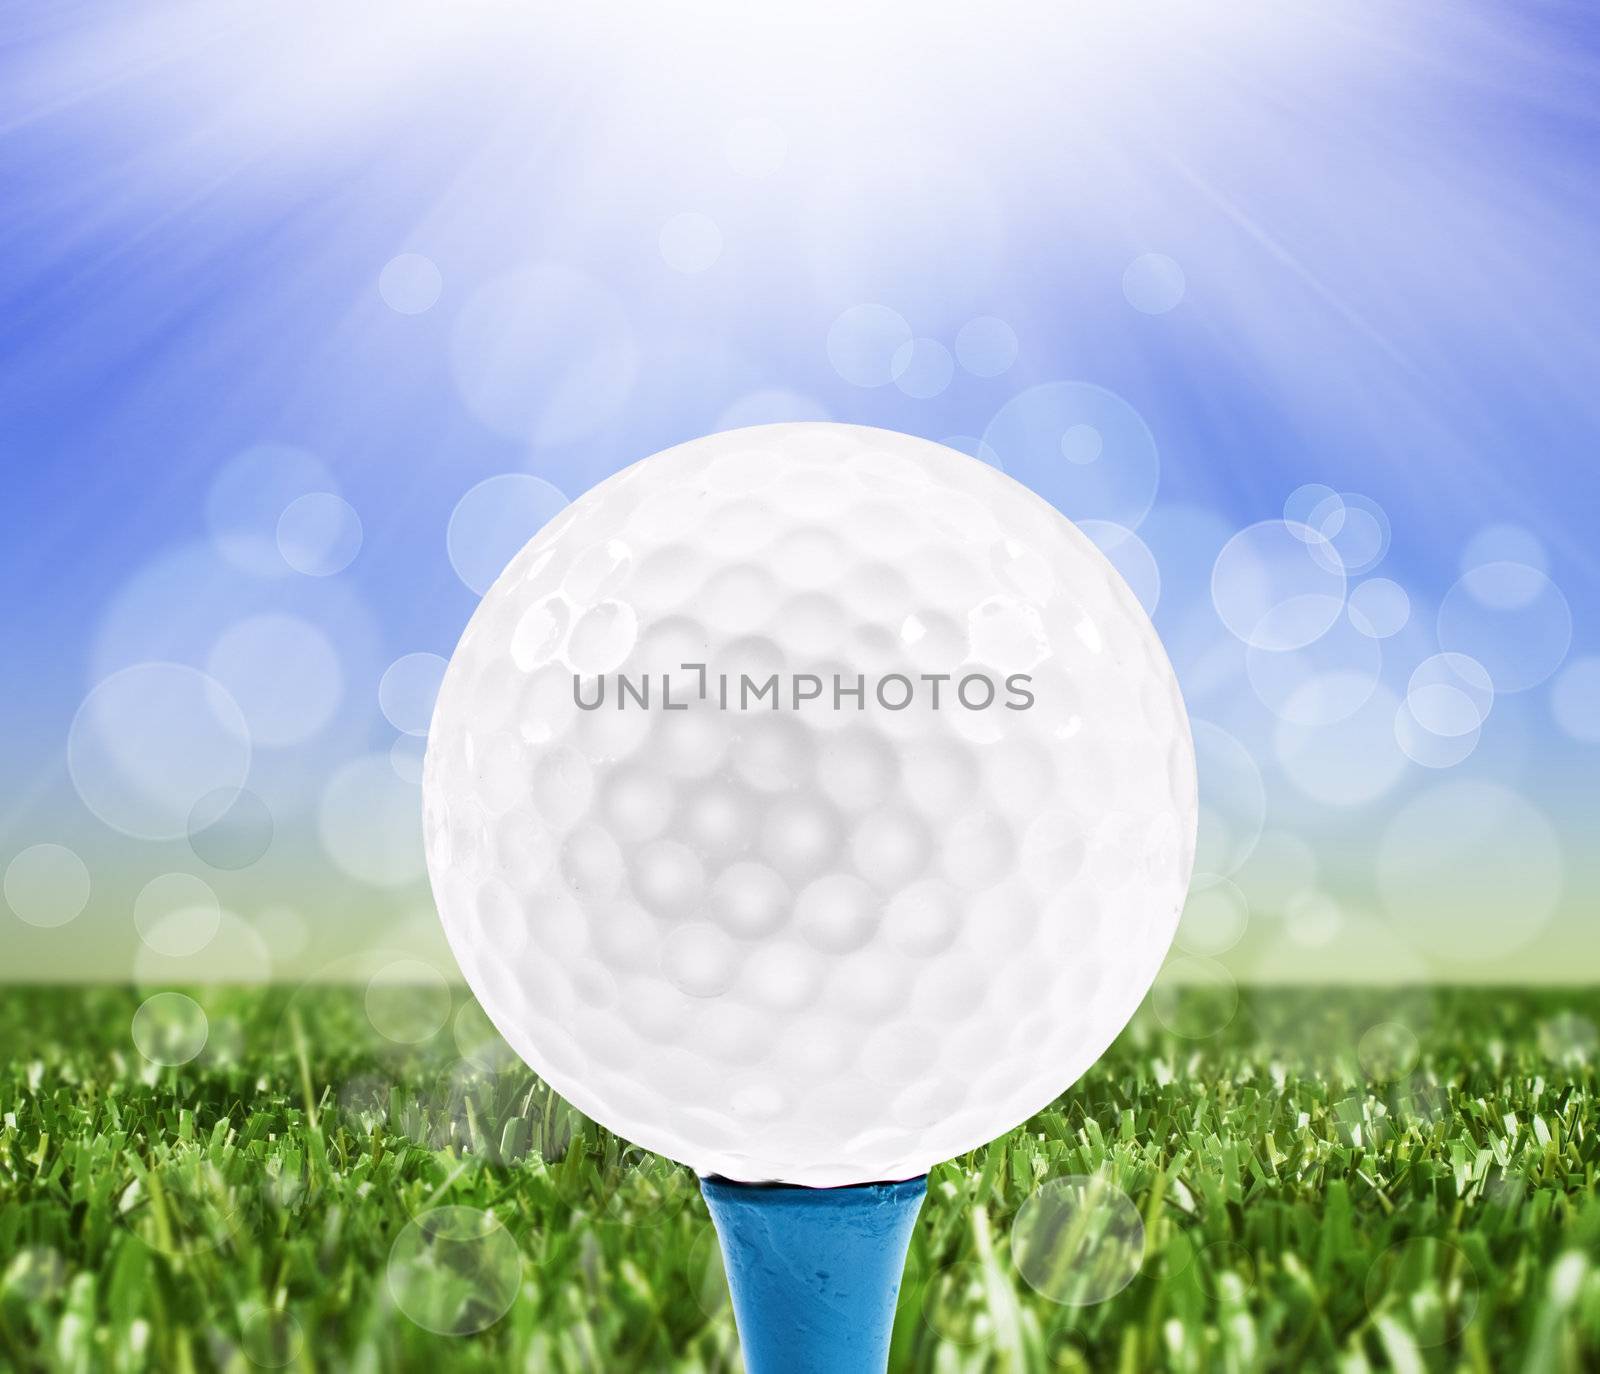 Spring background with a golf ball on a peg